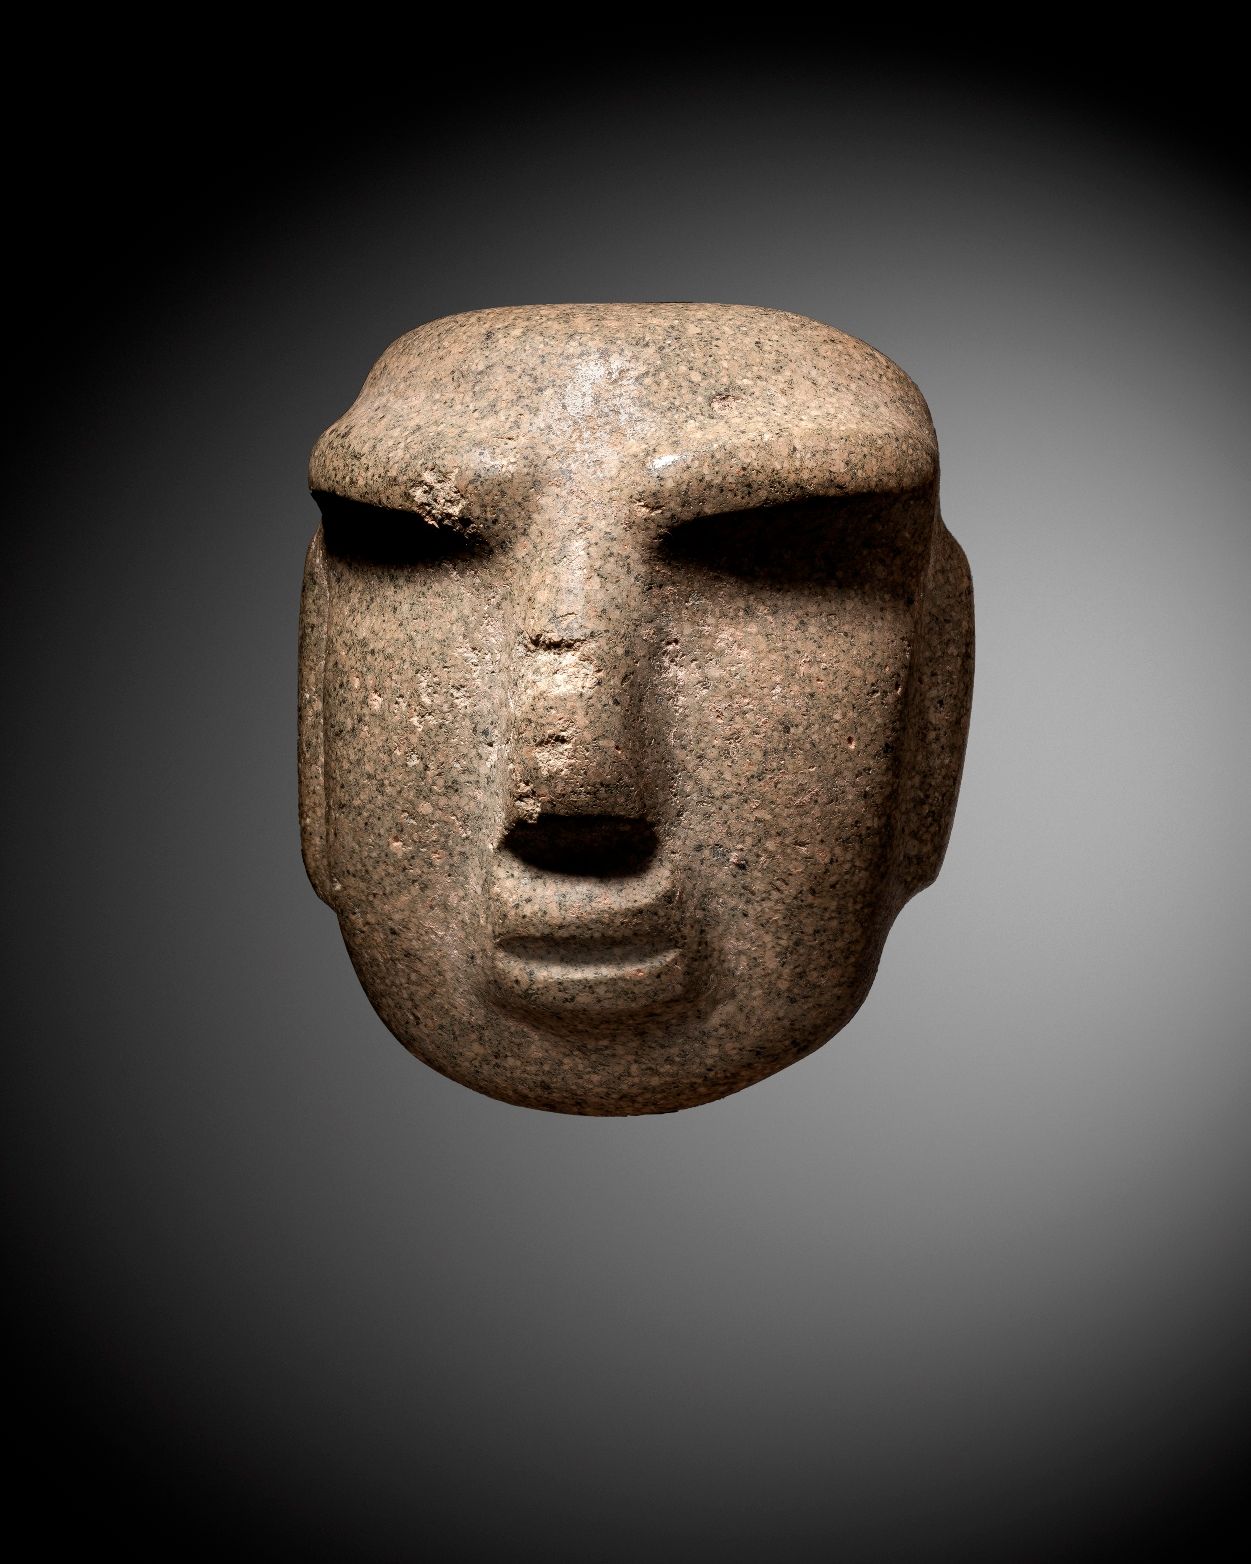 Null ANTHROPOMORPHY MASK
CHONTAL CULTURE, STATE OF GUERRERO, MEXICO
RECENT PRECL&hellip;